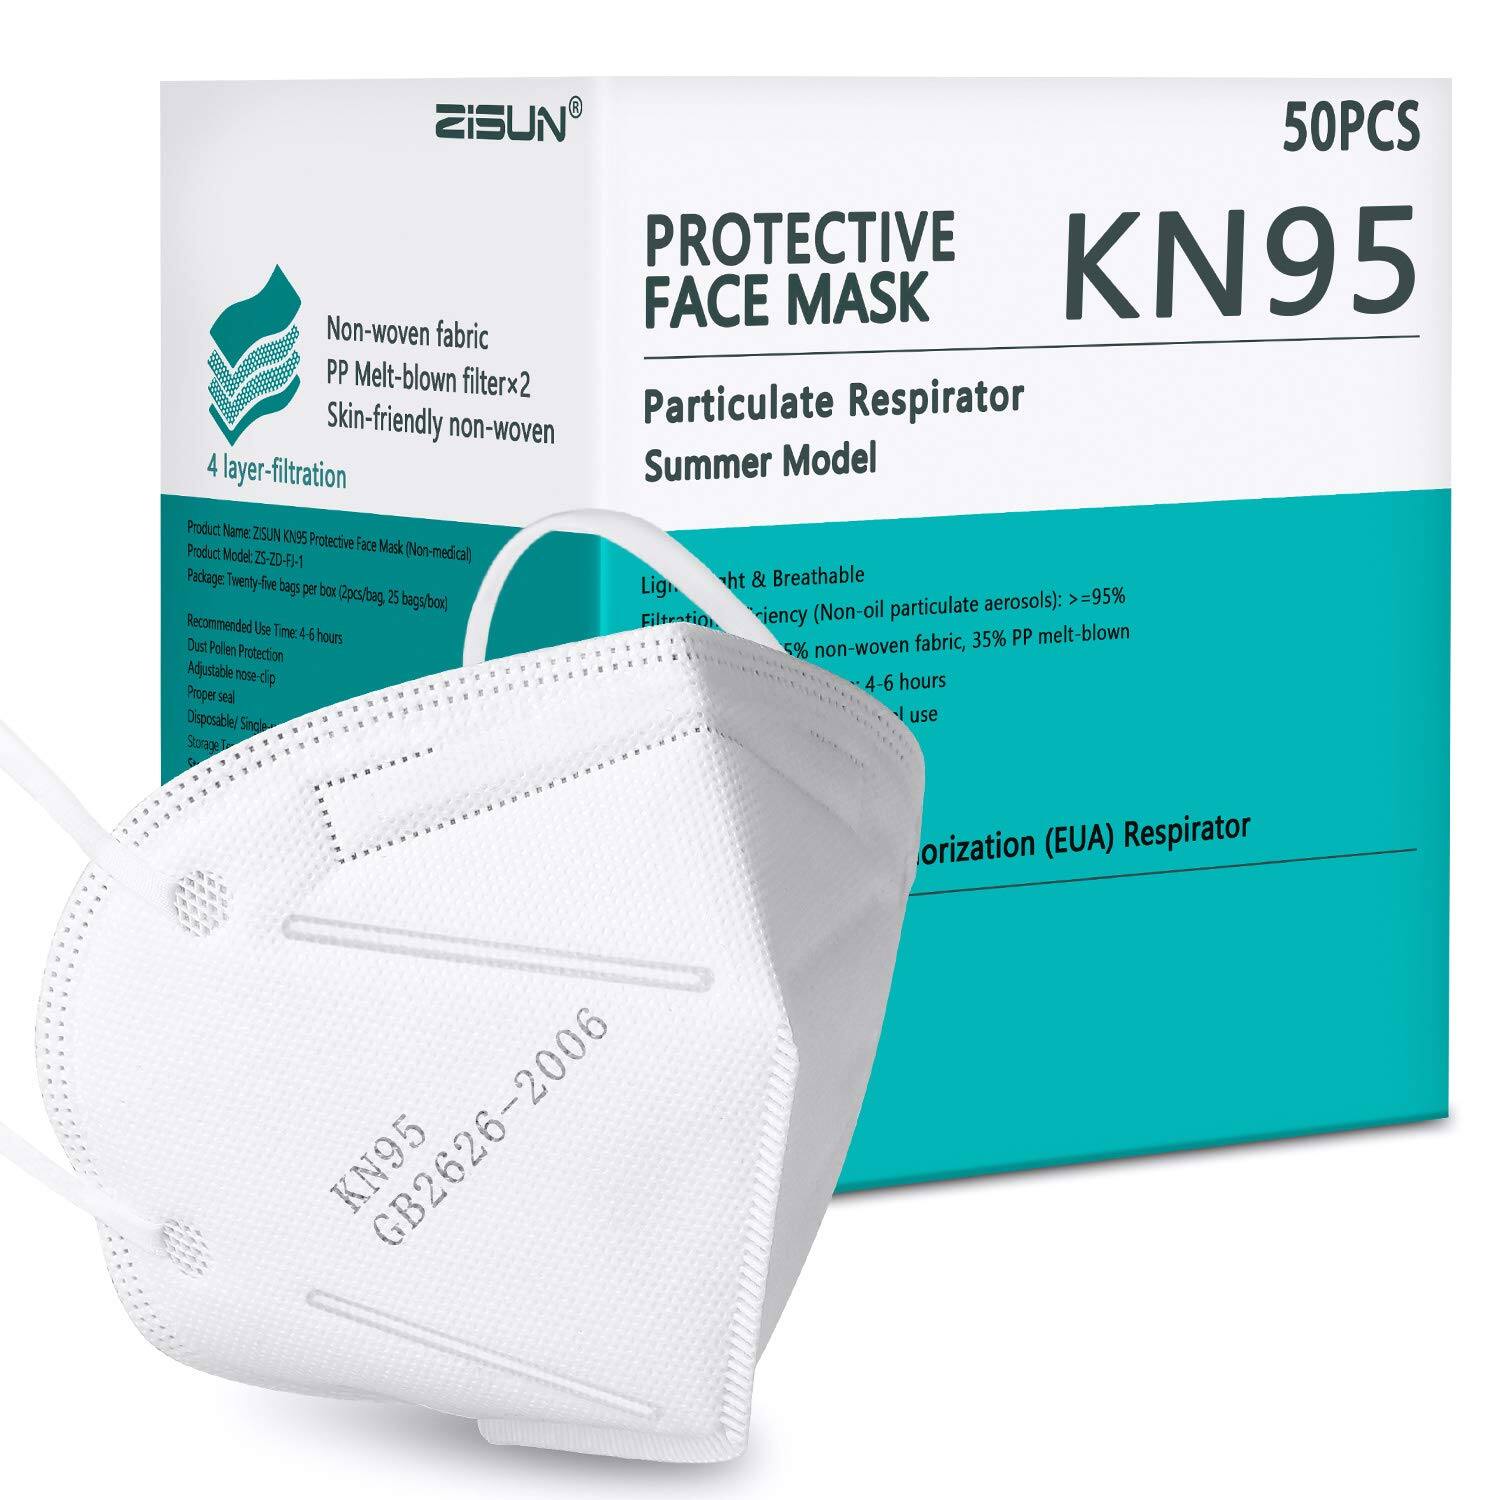 50-Pack Summer Model KN95 Face Mask FDA Individually Wrapped $29.99